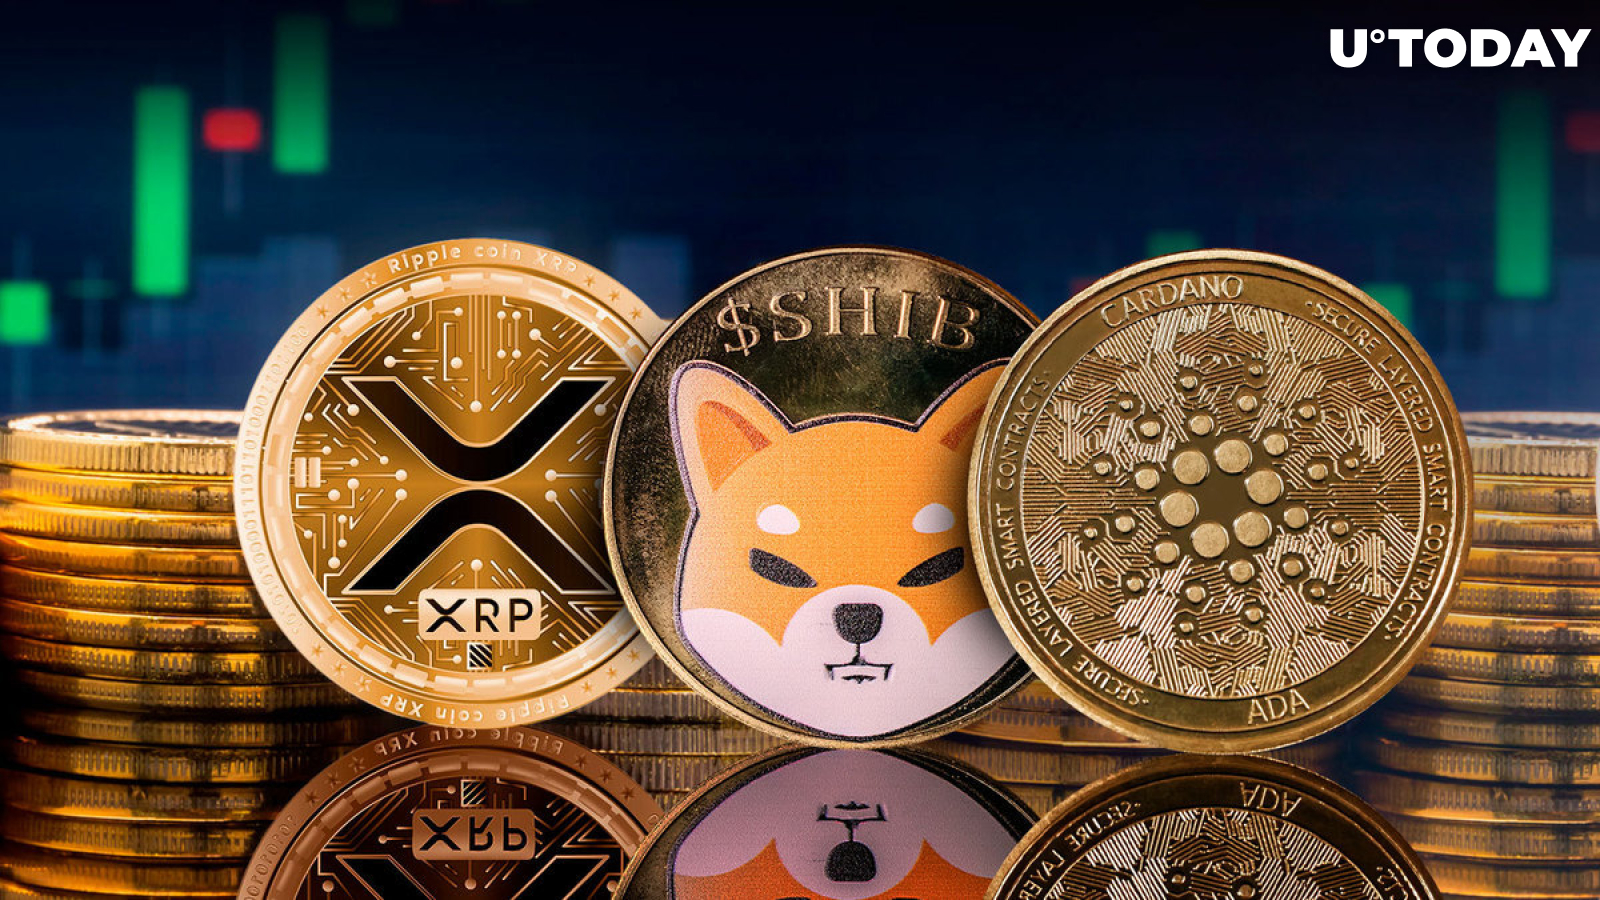 What Lies Ahead for XRP, Cardano and SHIB Holders? March Price History Gives Hint